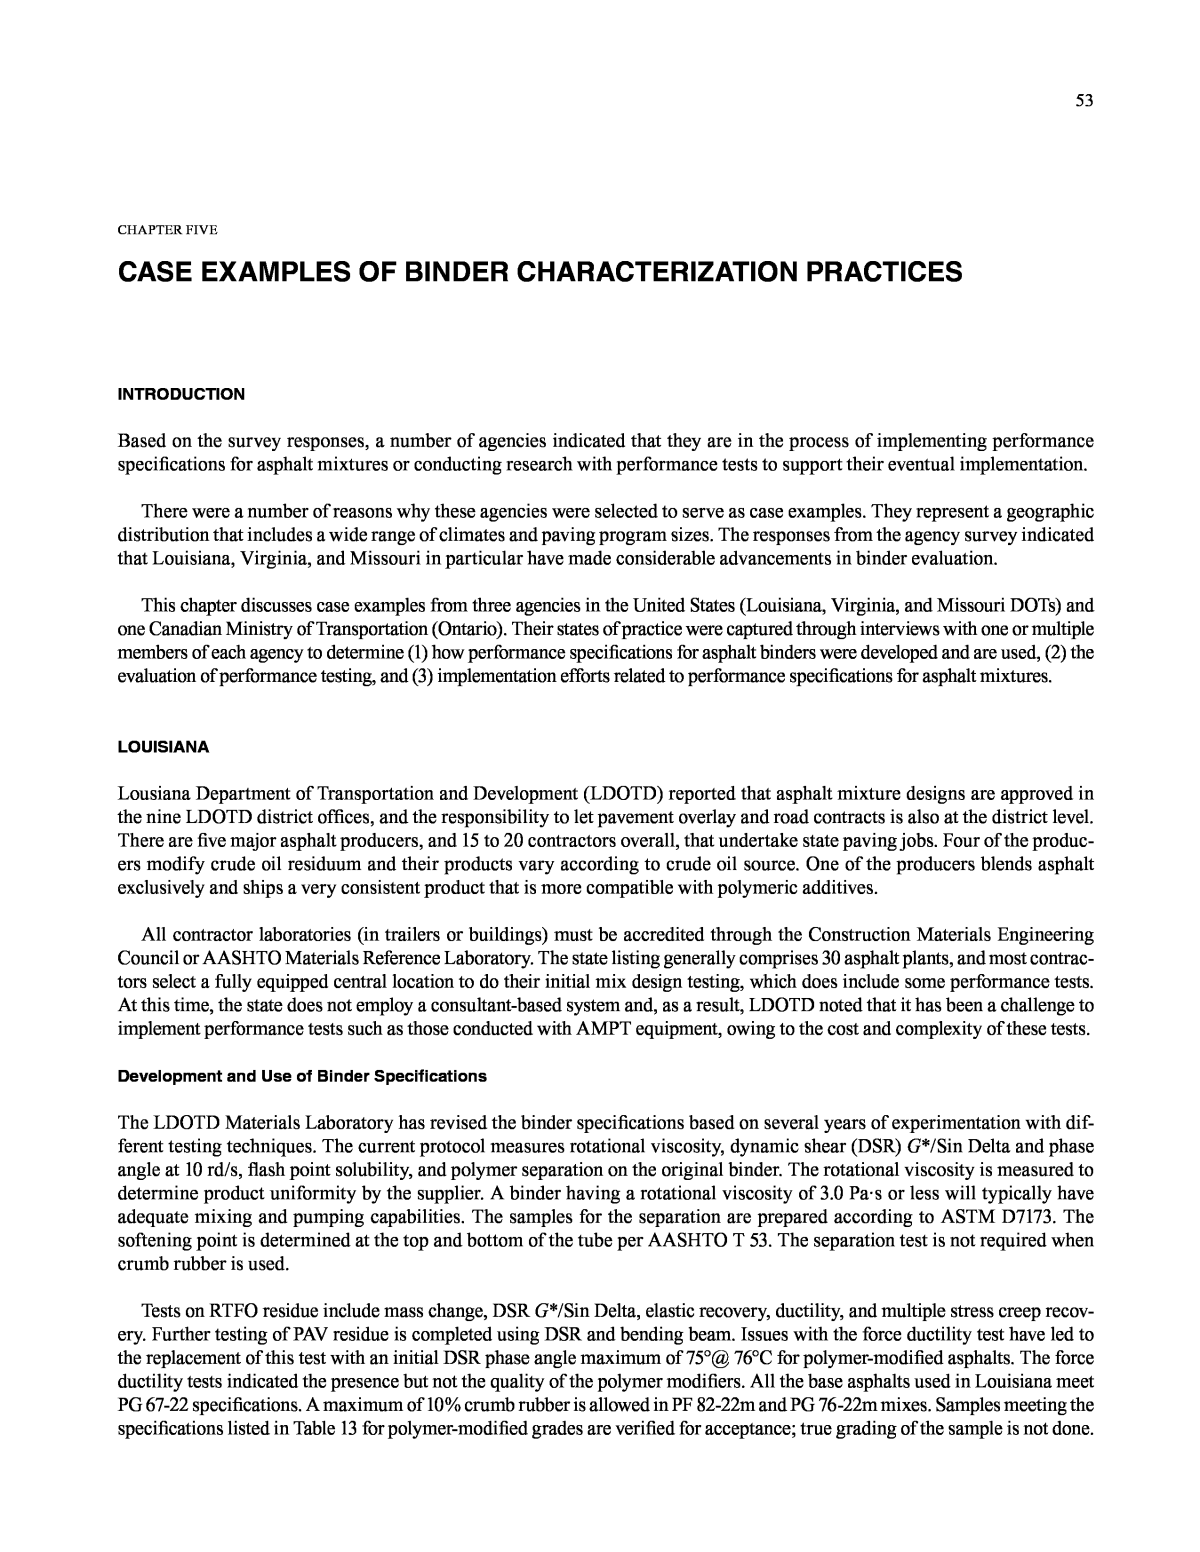 CHAPTER FIVE Case Examples of Binder Characterization Practices, Relationship Between Chemical Makeup of Binders and Engineering Performance